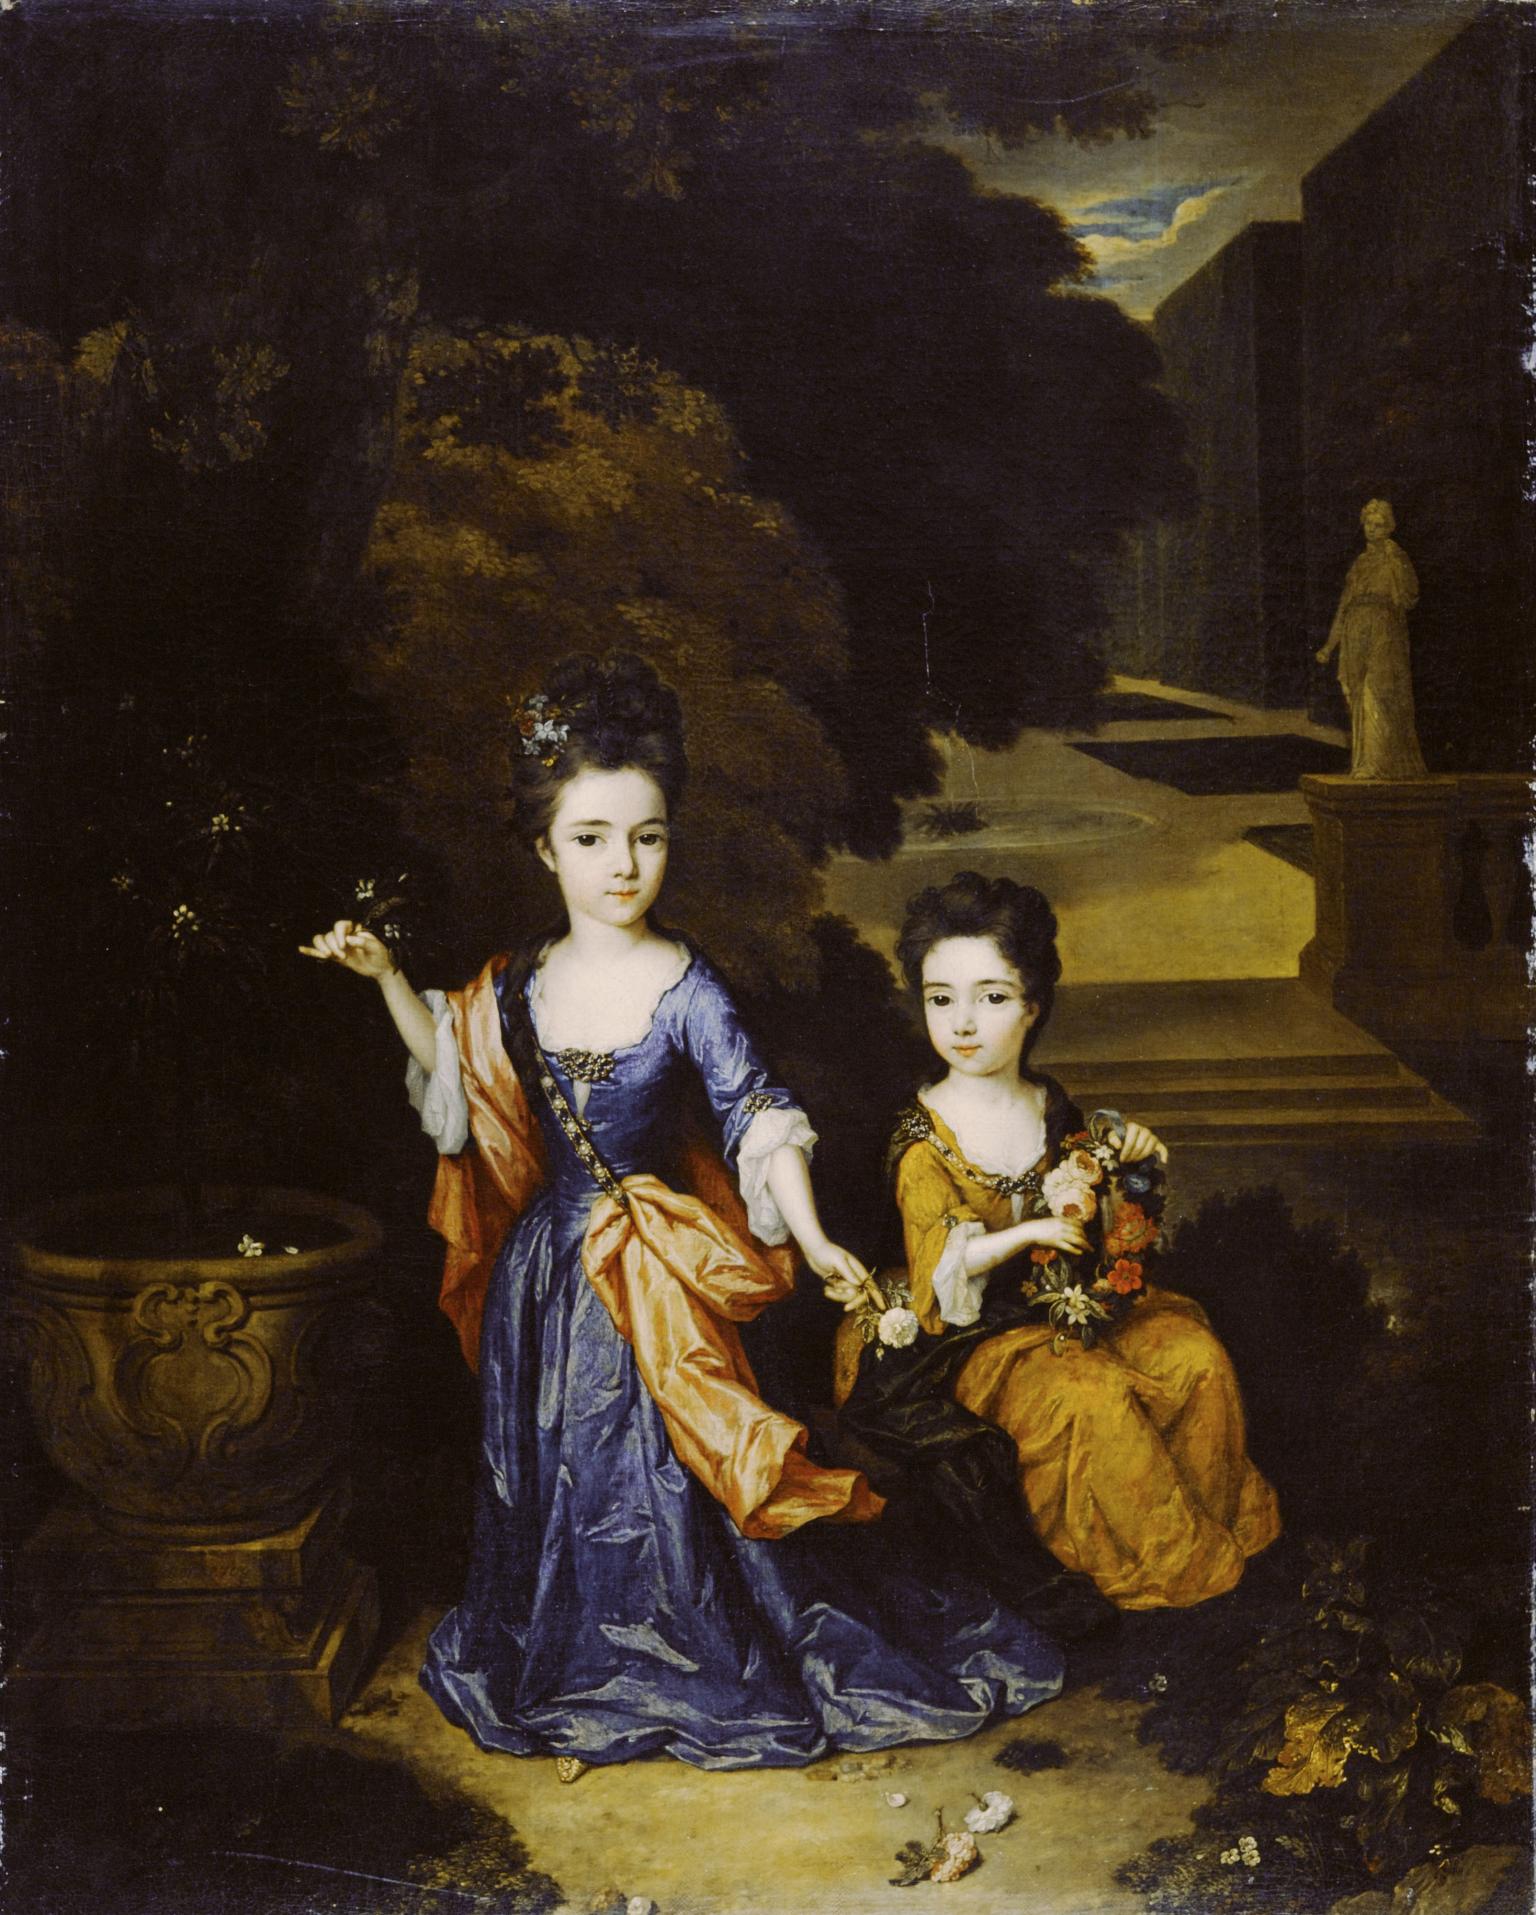 Painting of two girls, one seated and one standing, holding flowers in garden with sculpture and hedges in background.